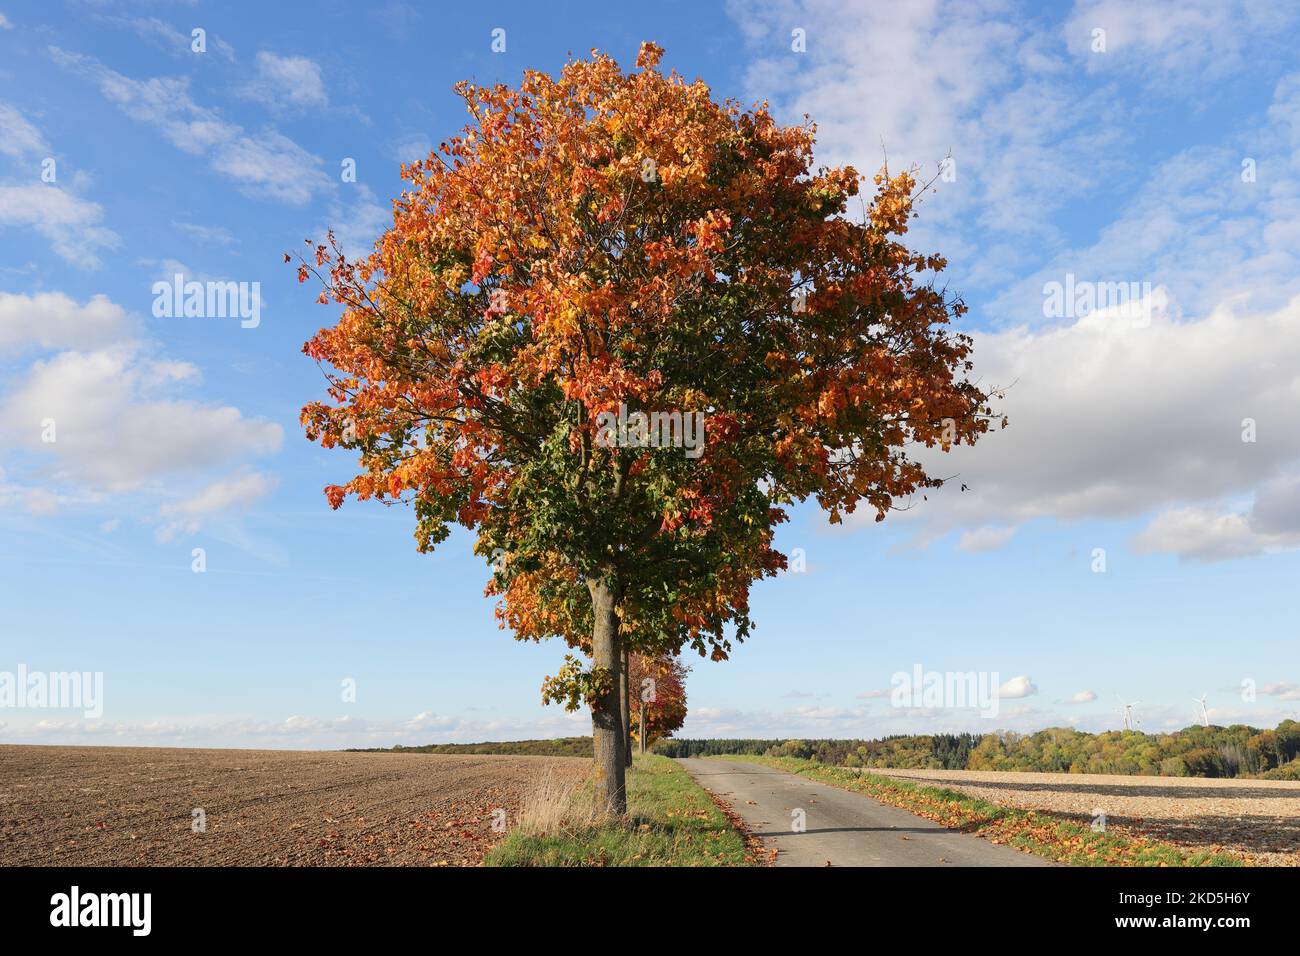 Wide-angle view of a beautiful autumnal colored tree on a land road, copy space Stock Photo